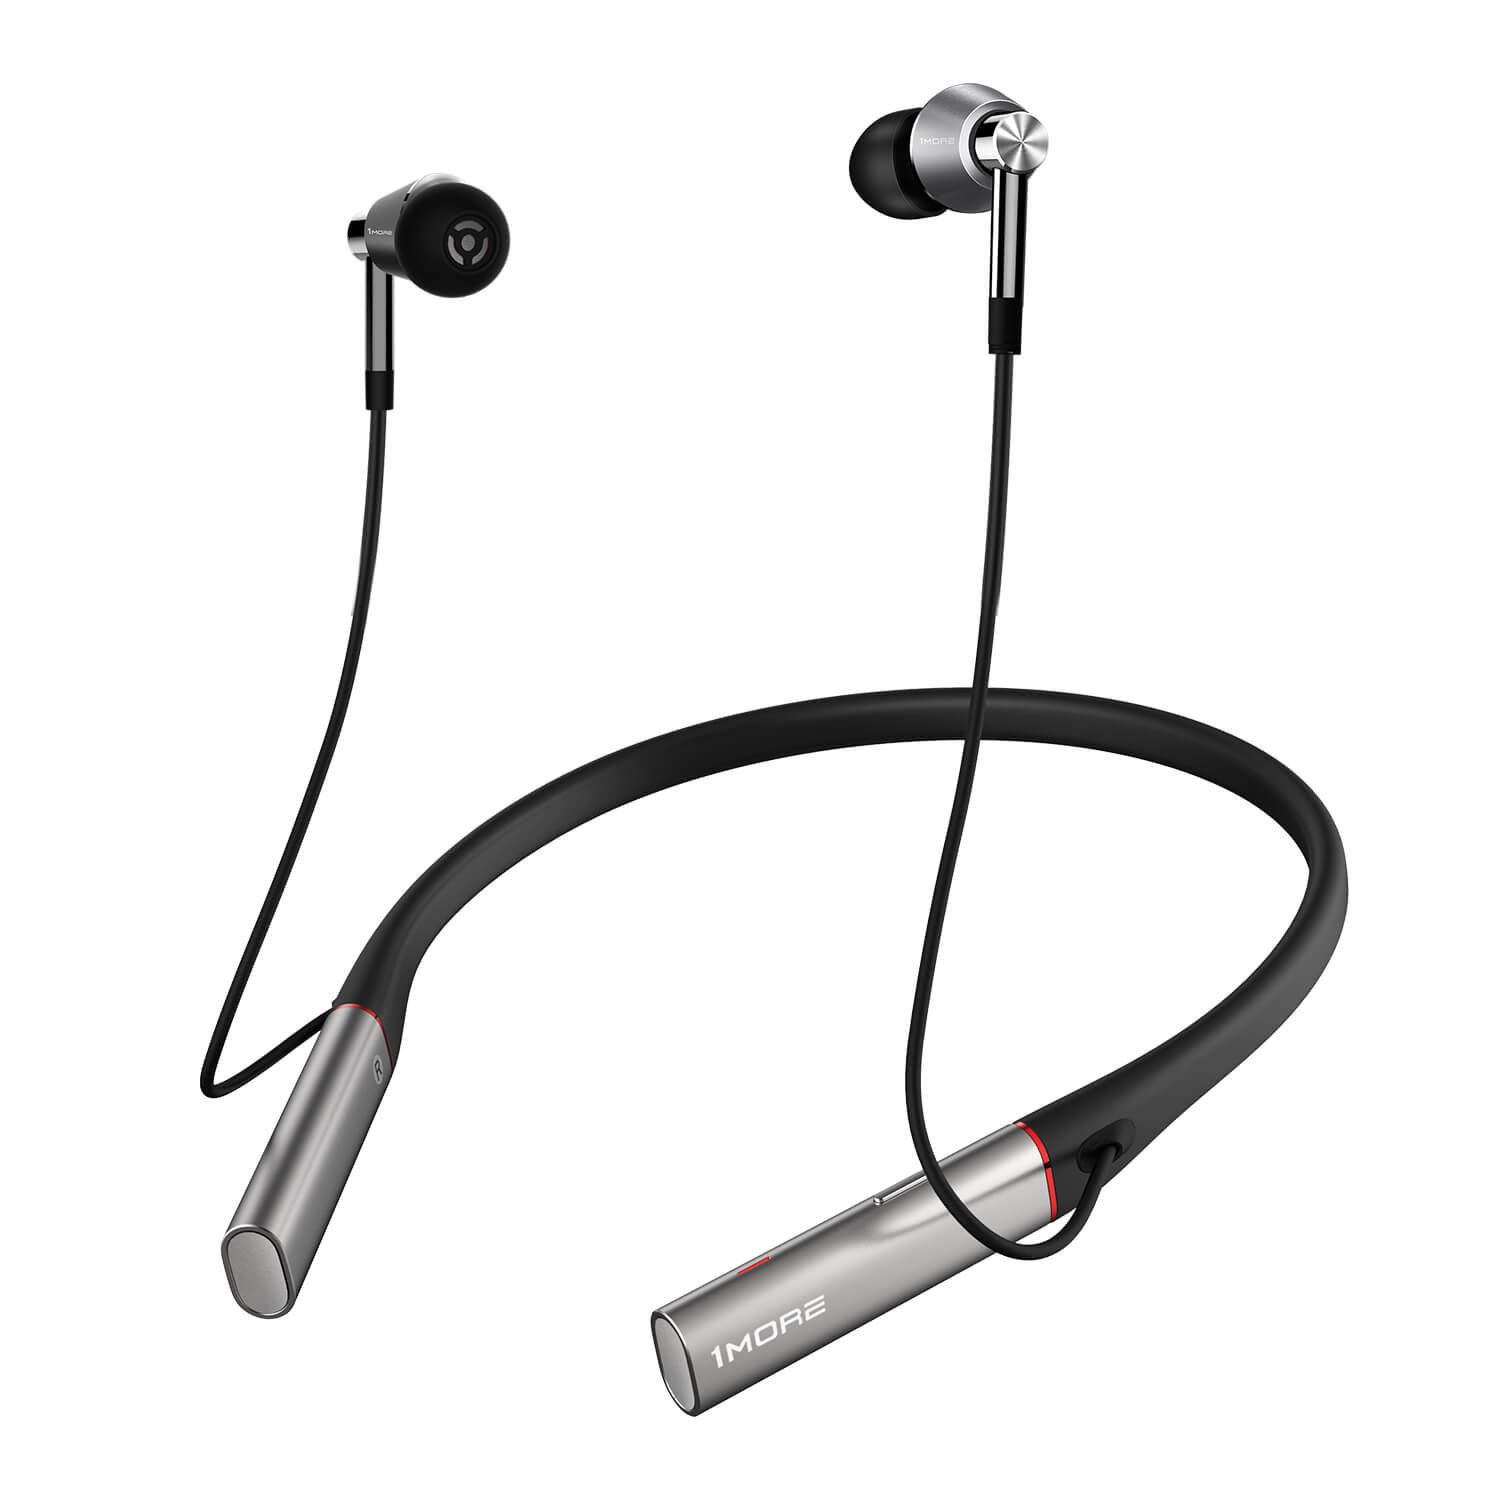 1MORE Triple Driver Bluetooth In-Ear Headphones with Smart Microphone and Remote